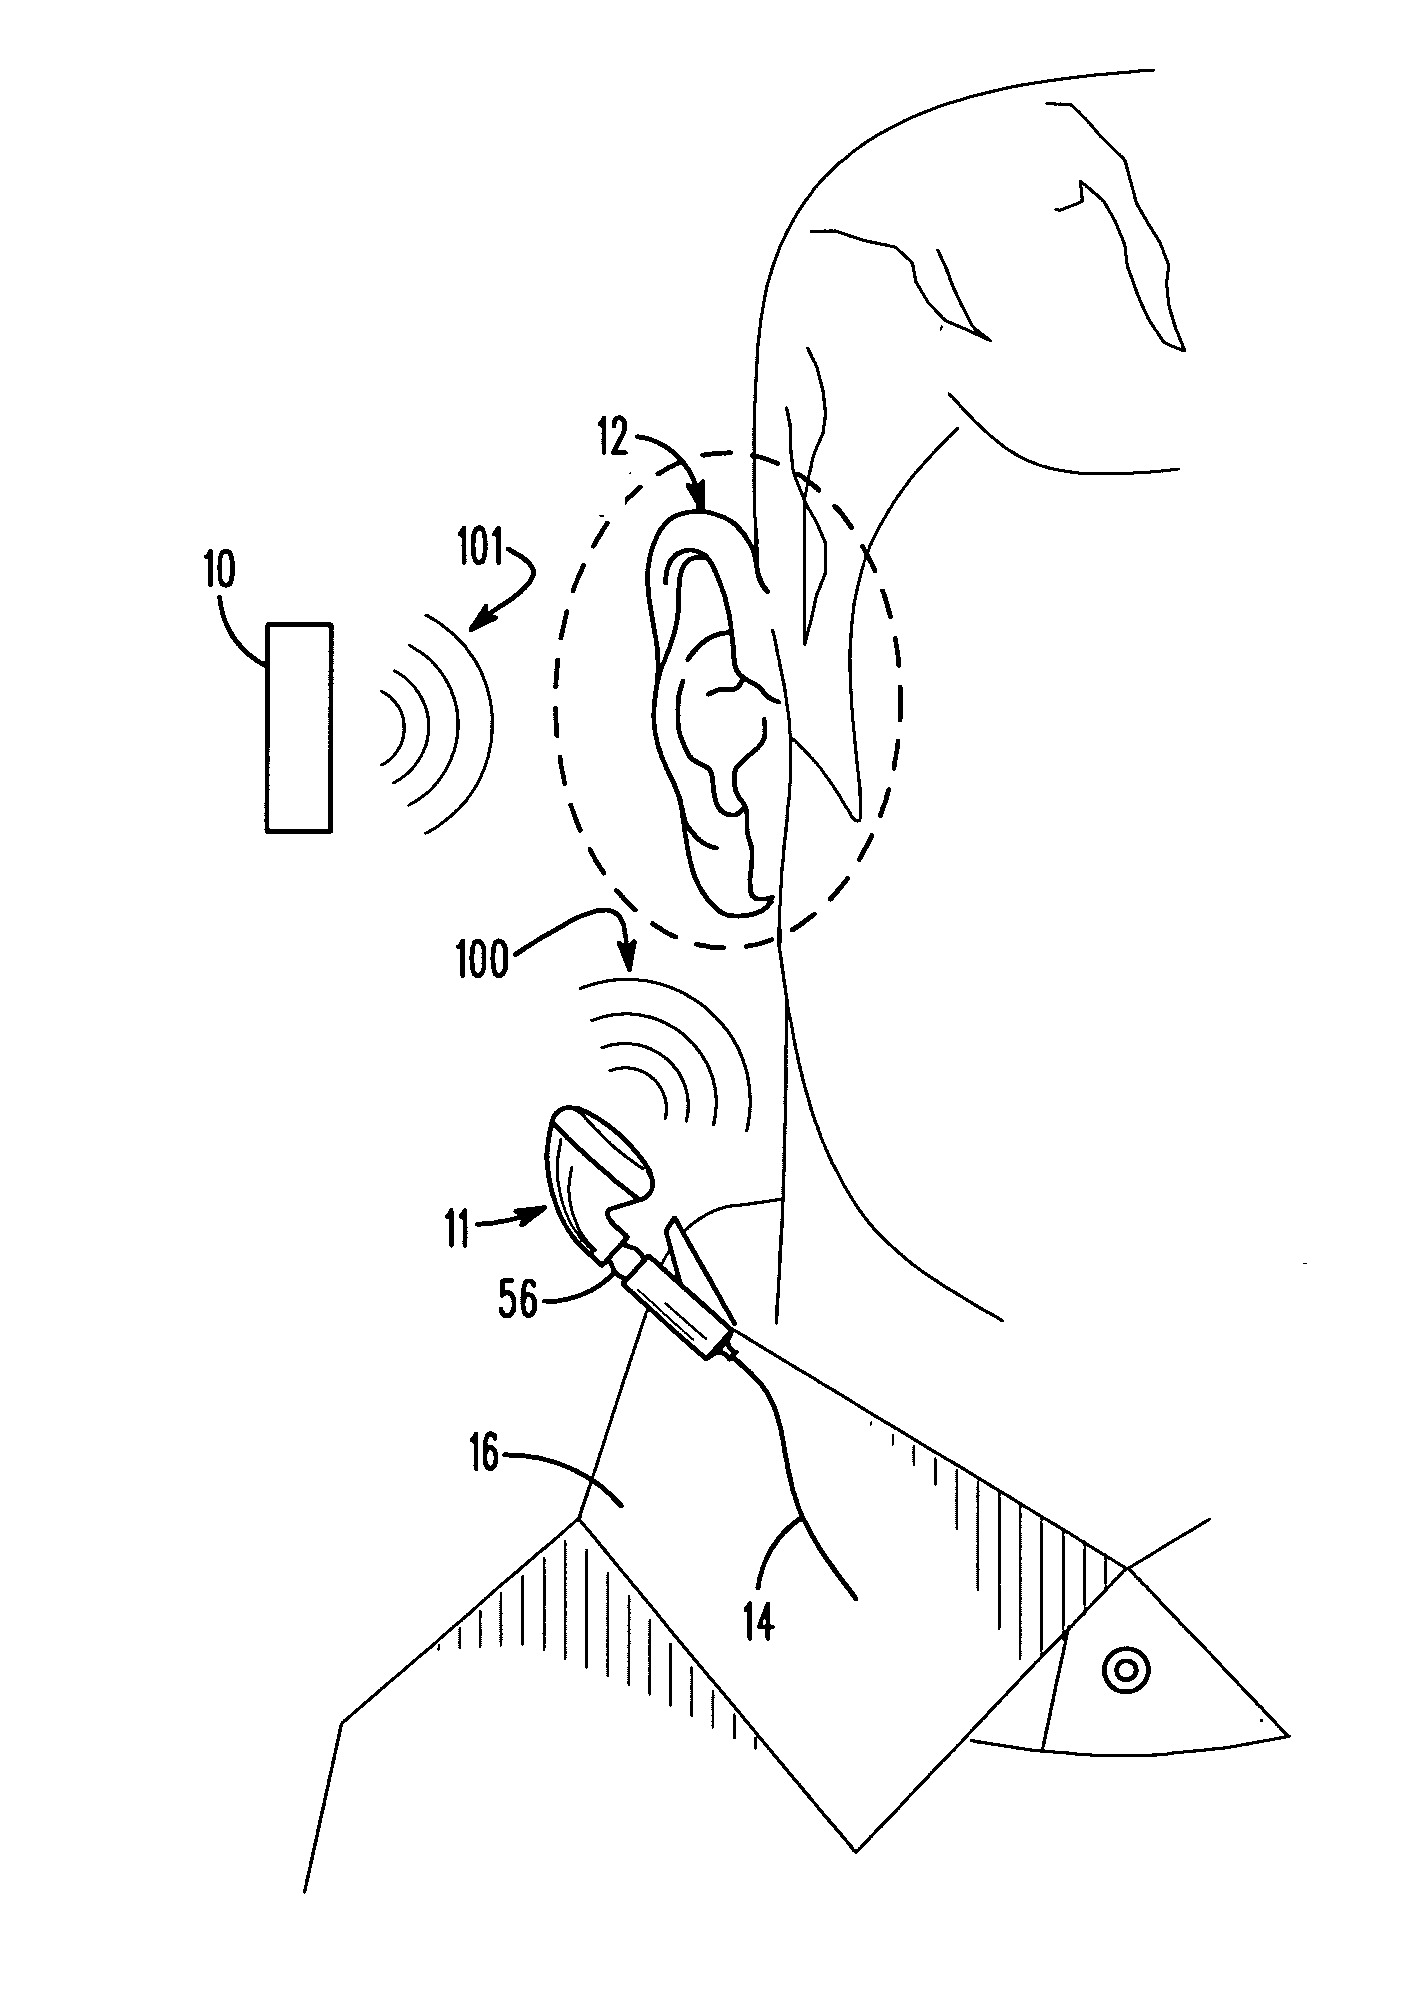 Earphone system, apparatus, and method for enhancing personal safety